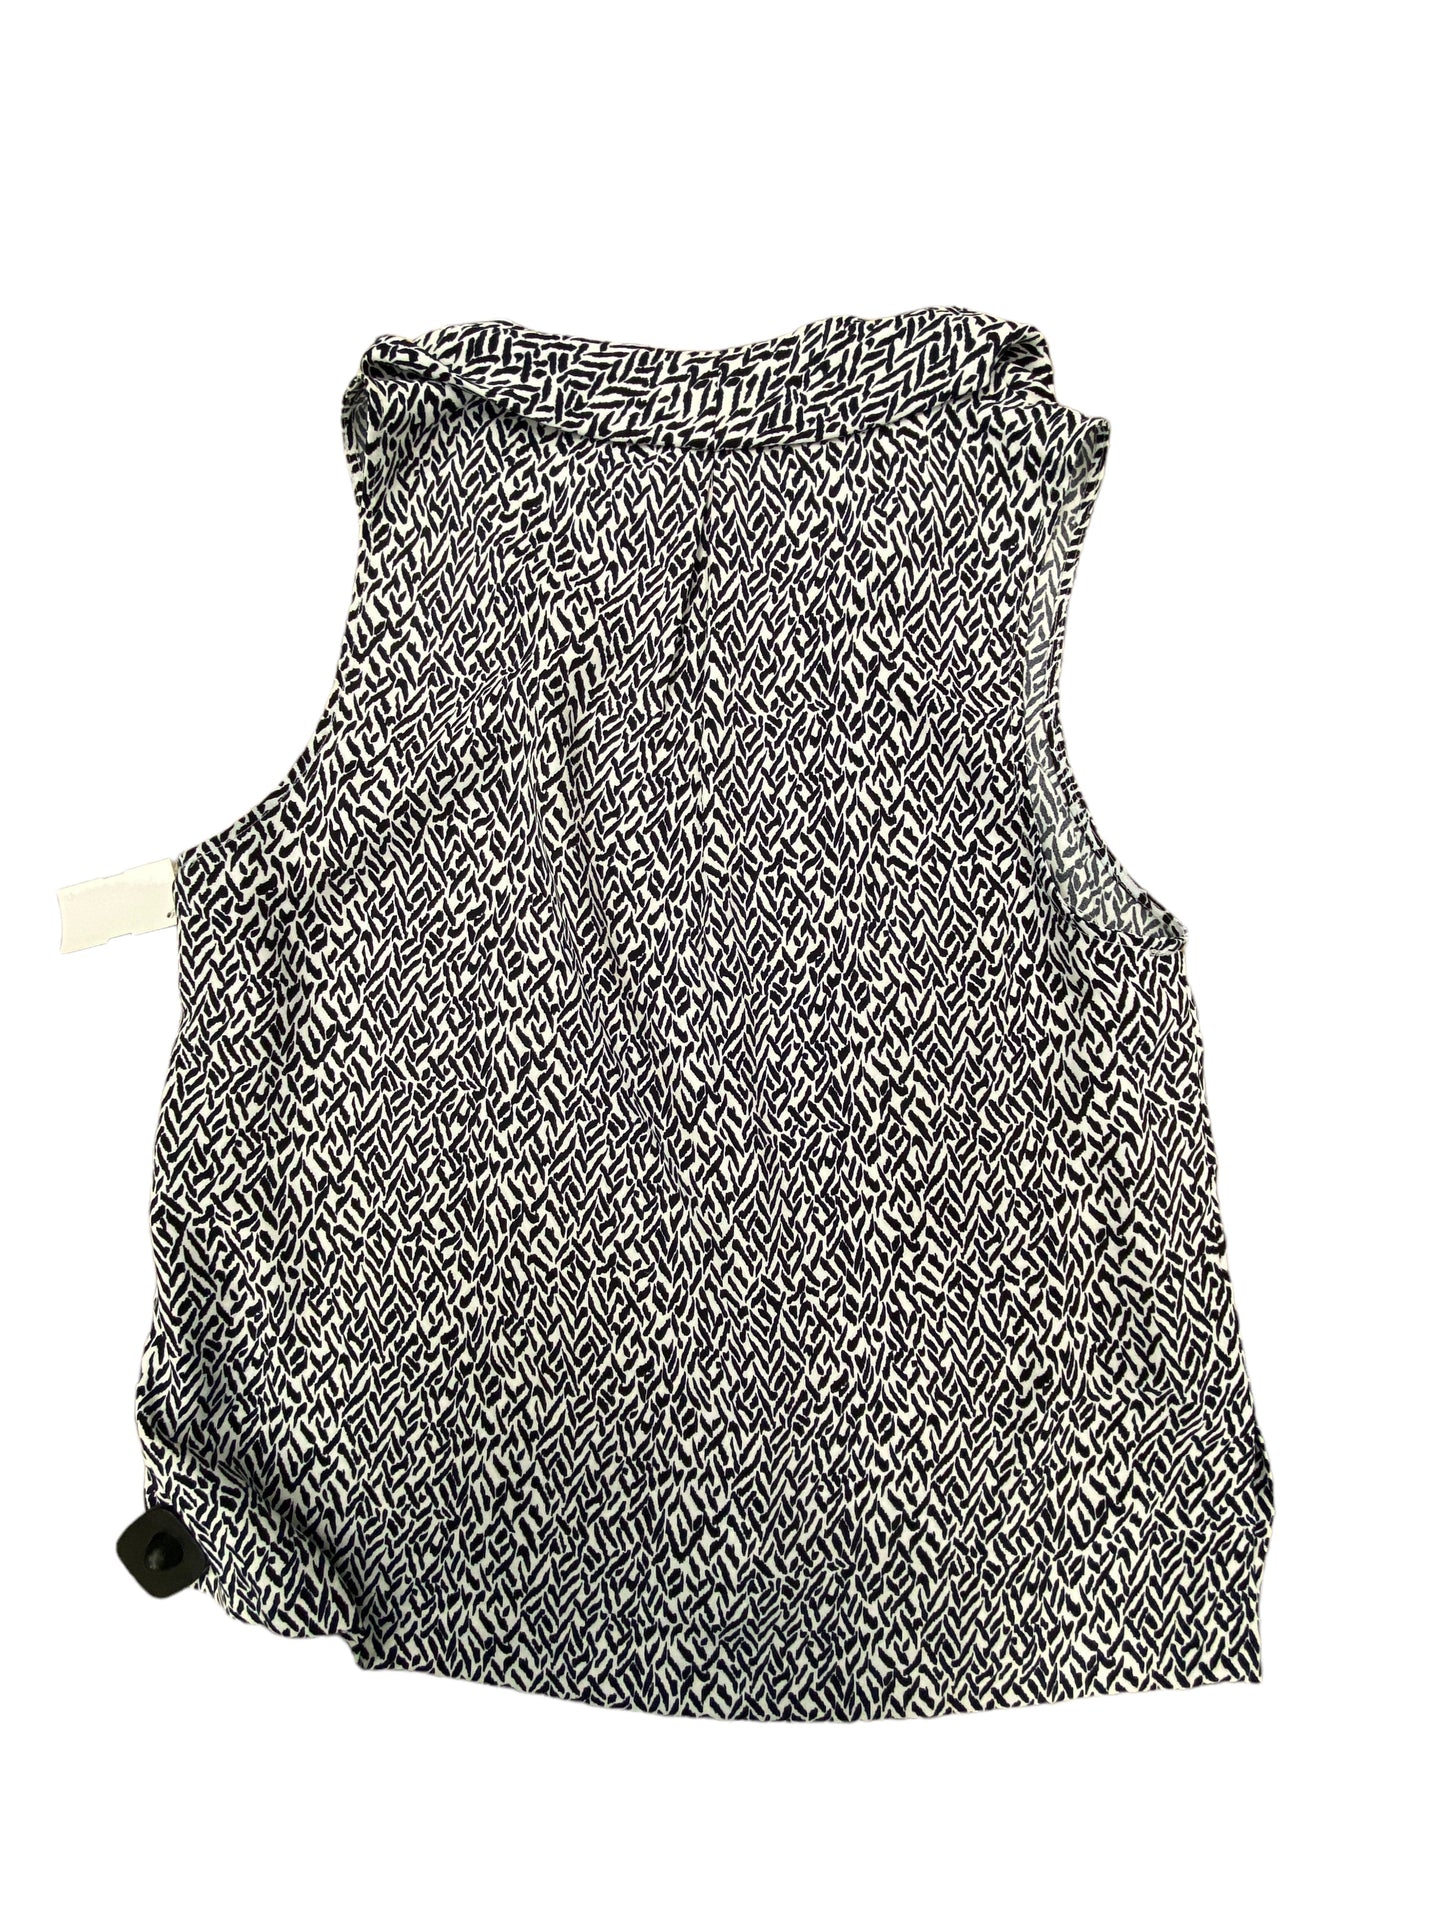 Black & White Top Sleeveless Vince Camuto, Size L